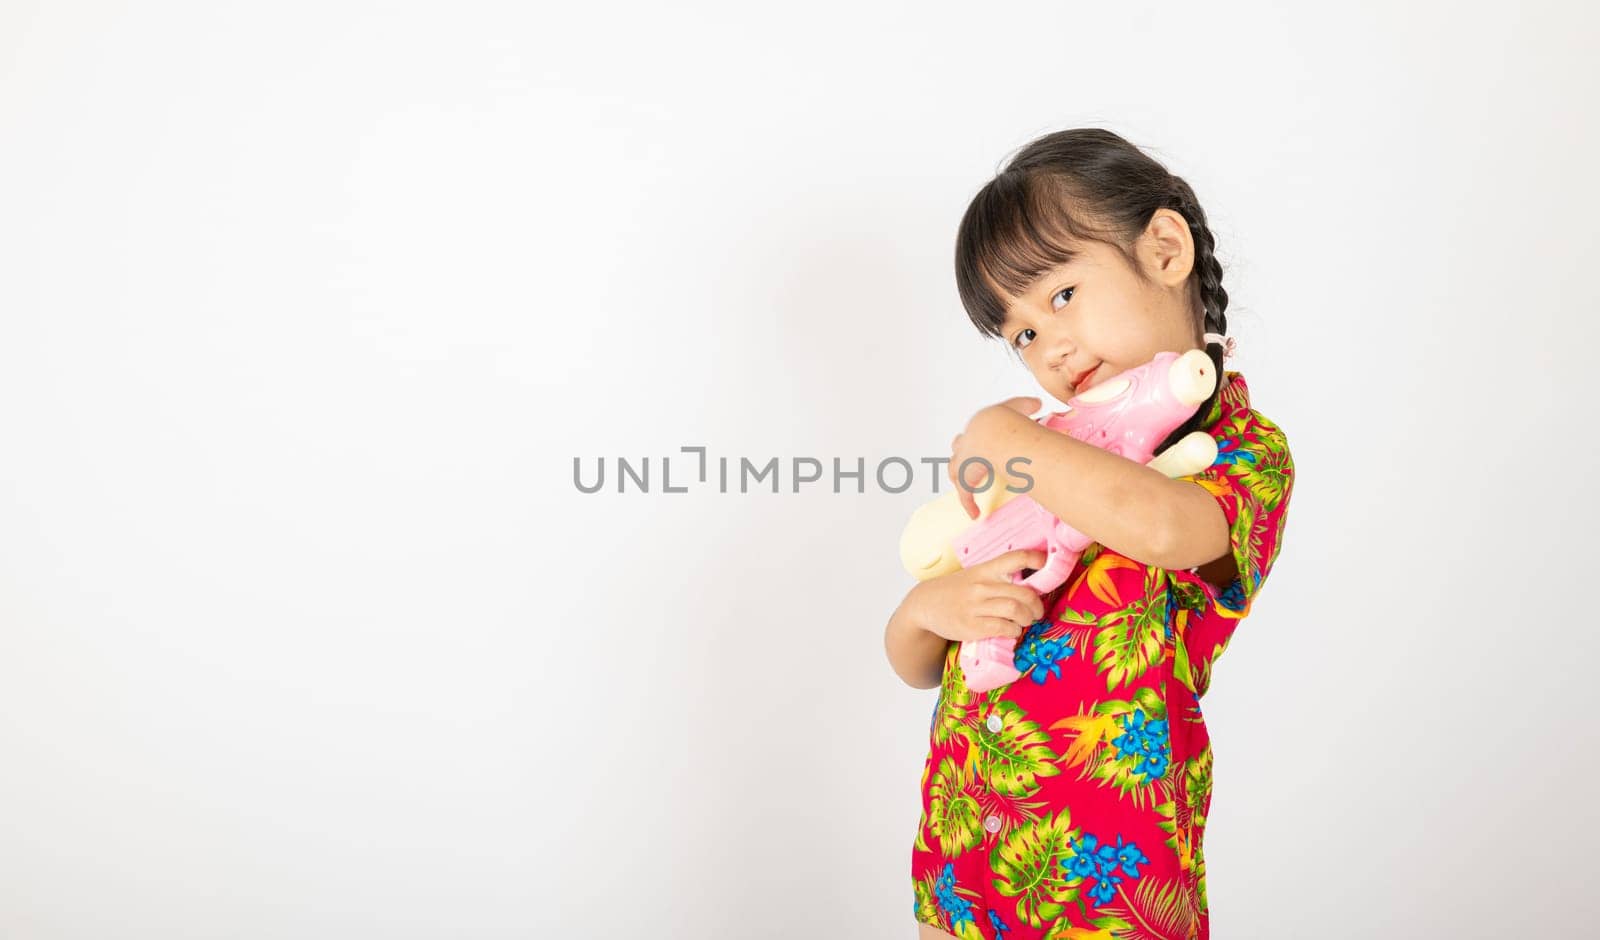 Happy Songkran Day, Asian kid girl with floral shirt hold water gun, Thai child funny hold toy water pistol and smile, isolated on white background, Thailand Songkran festival national culture concept